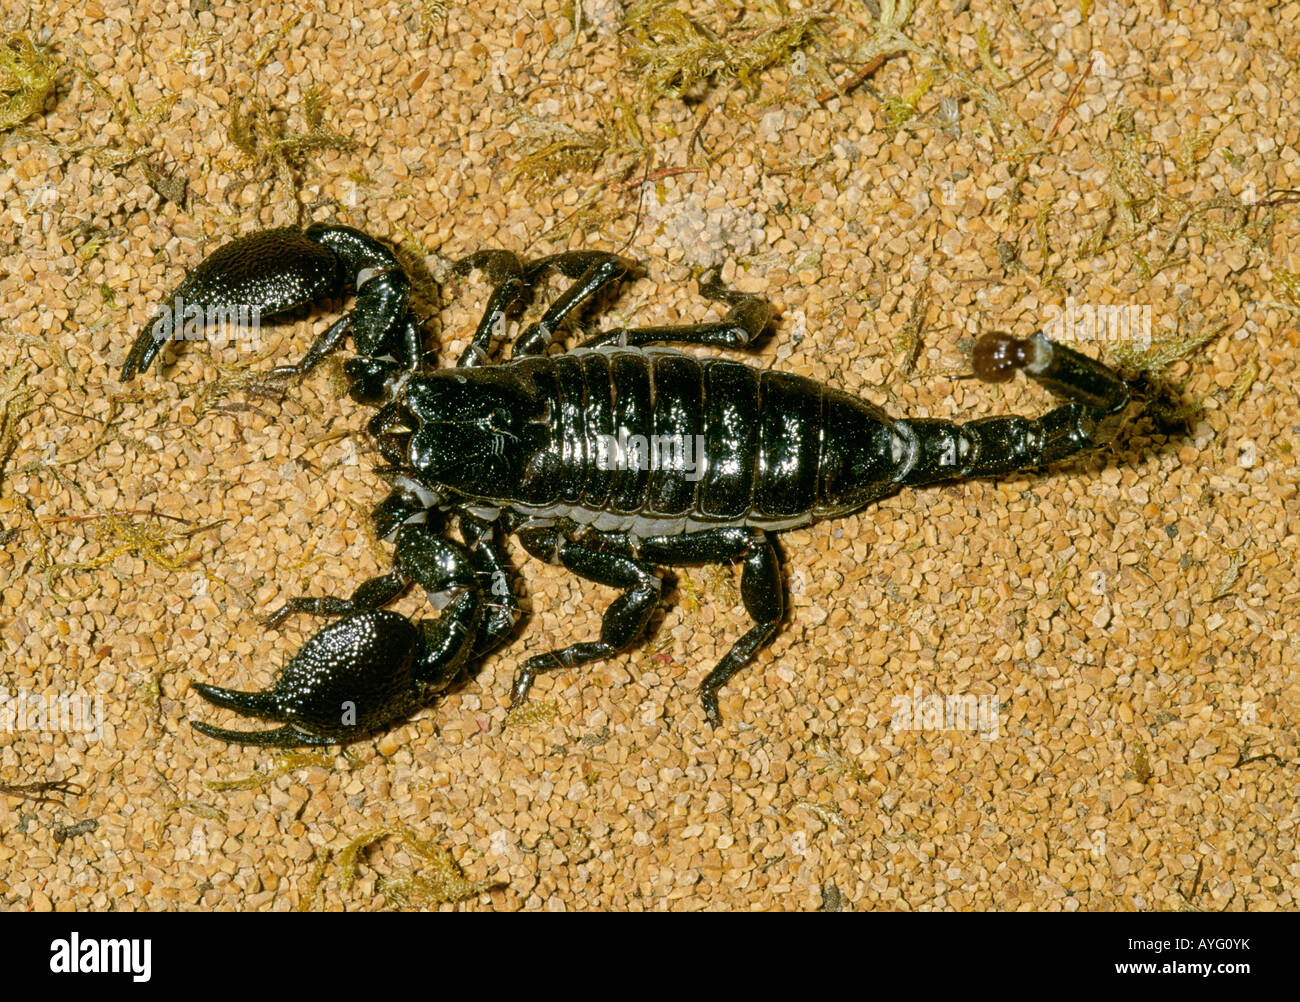 A Large Black Emperor Scorpion Pandinus Imperator Native To Some Parts